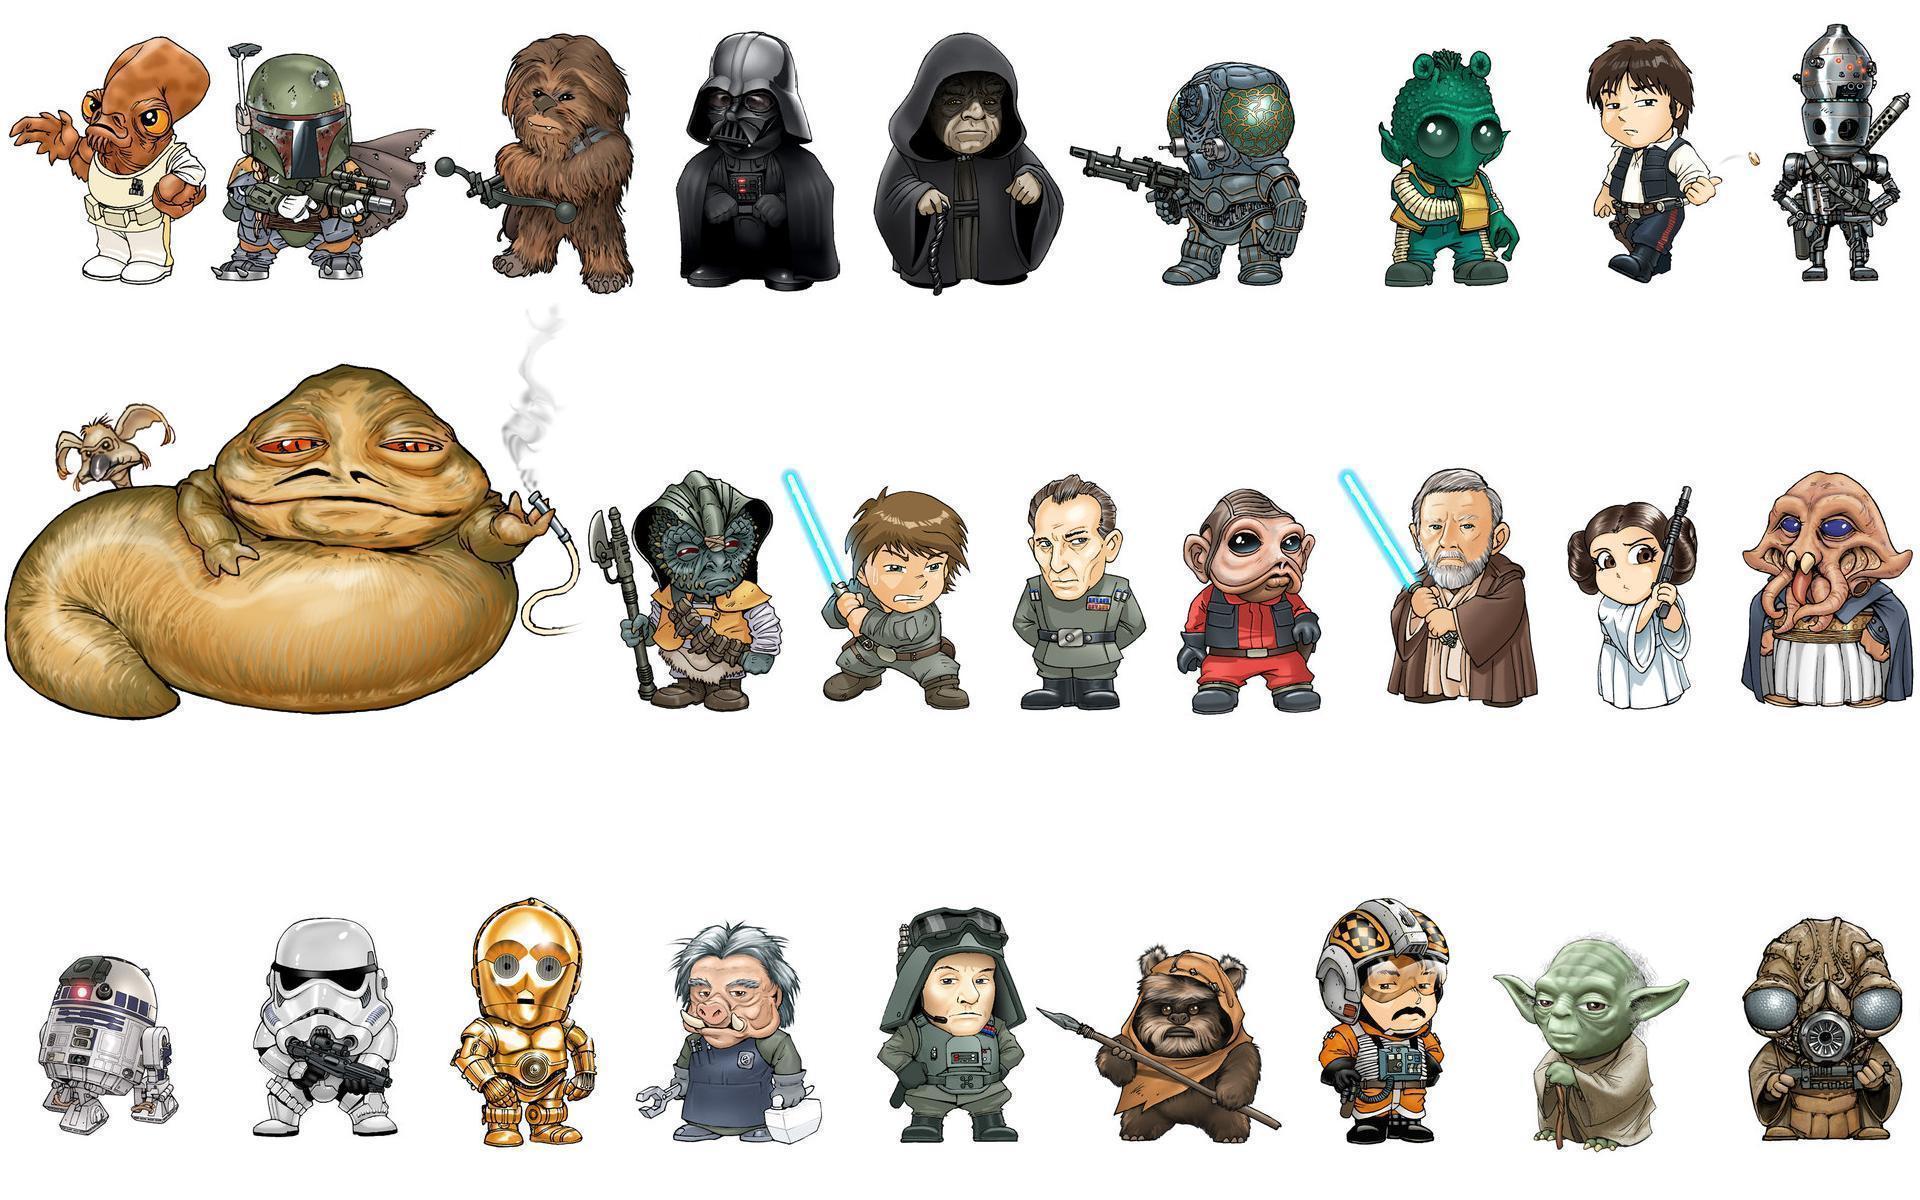 Characters List / All Star Wars Characters